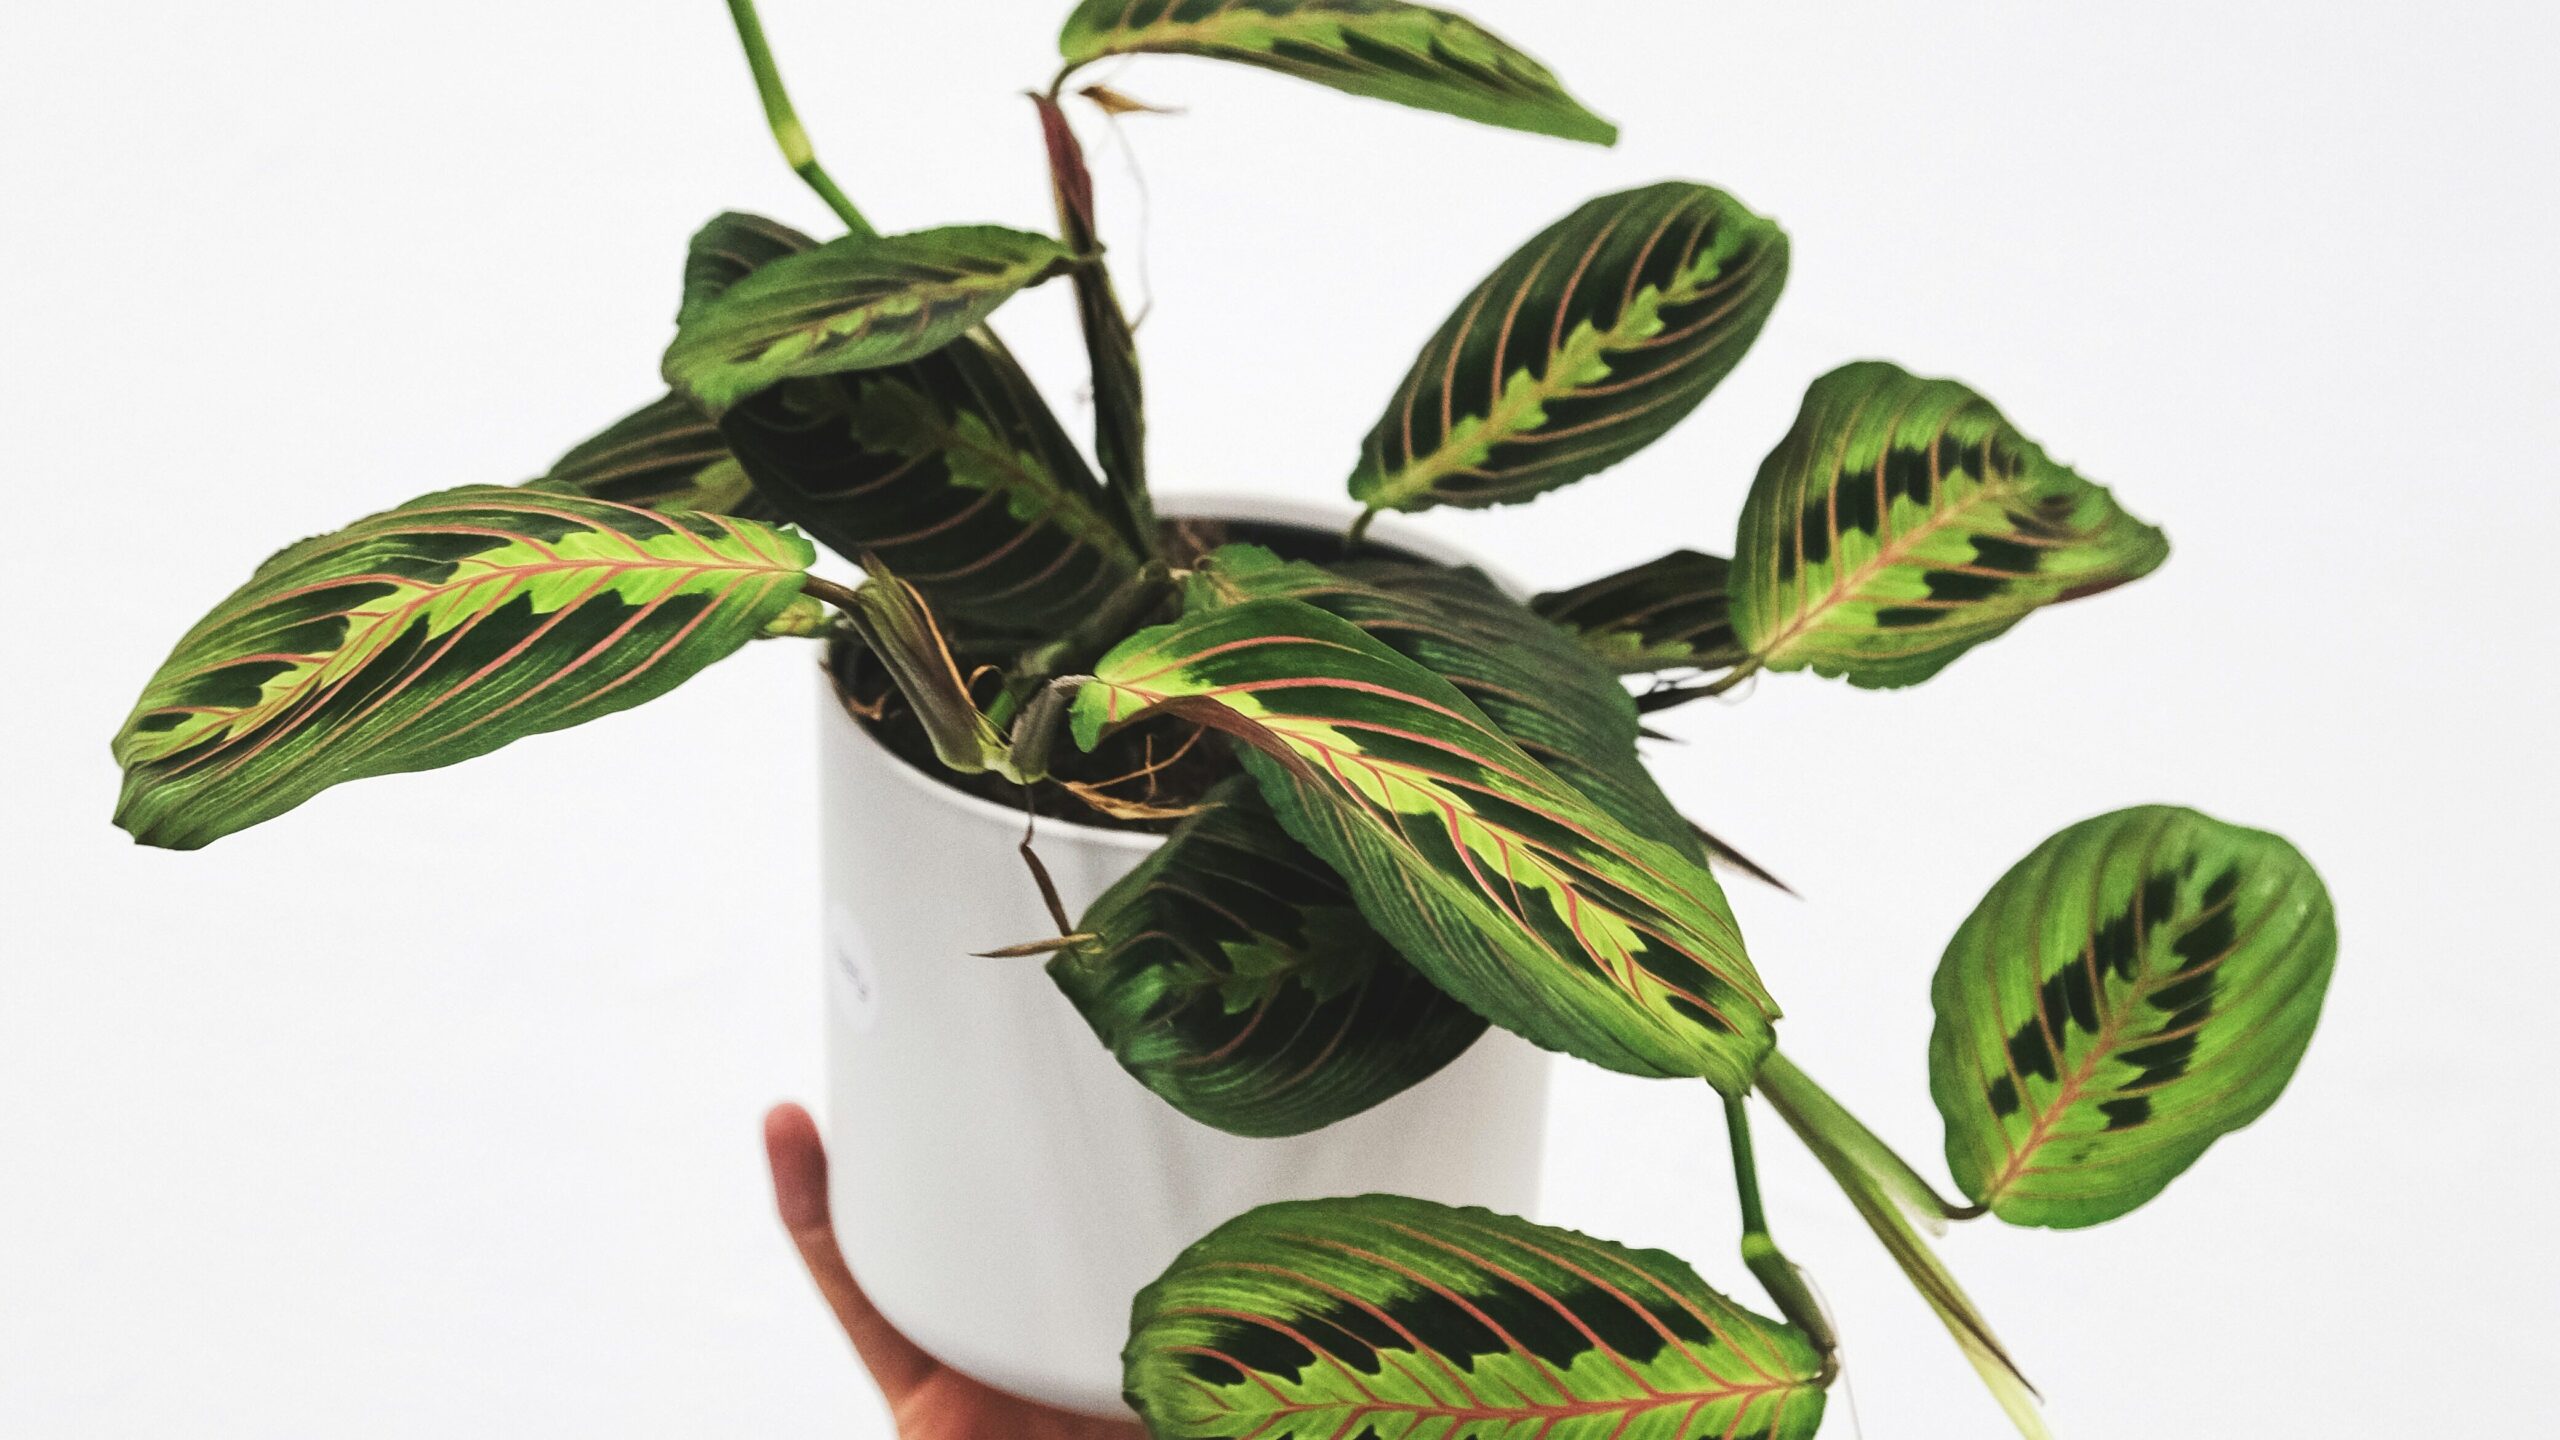 Hand holding a prayer plant with lush green leaves in a white pot, demonstrating plant care.

